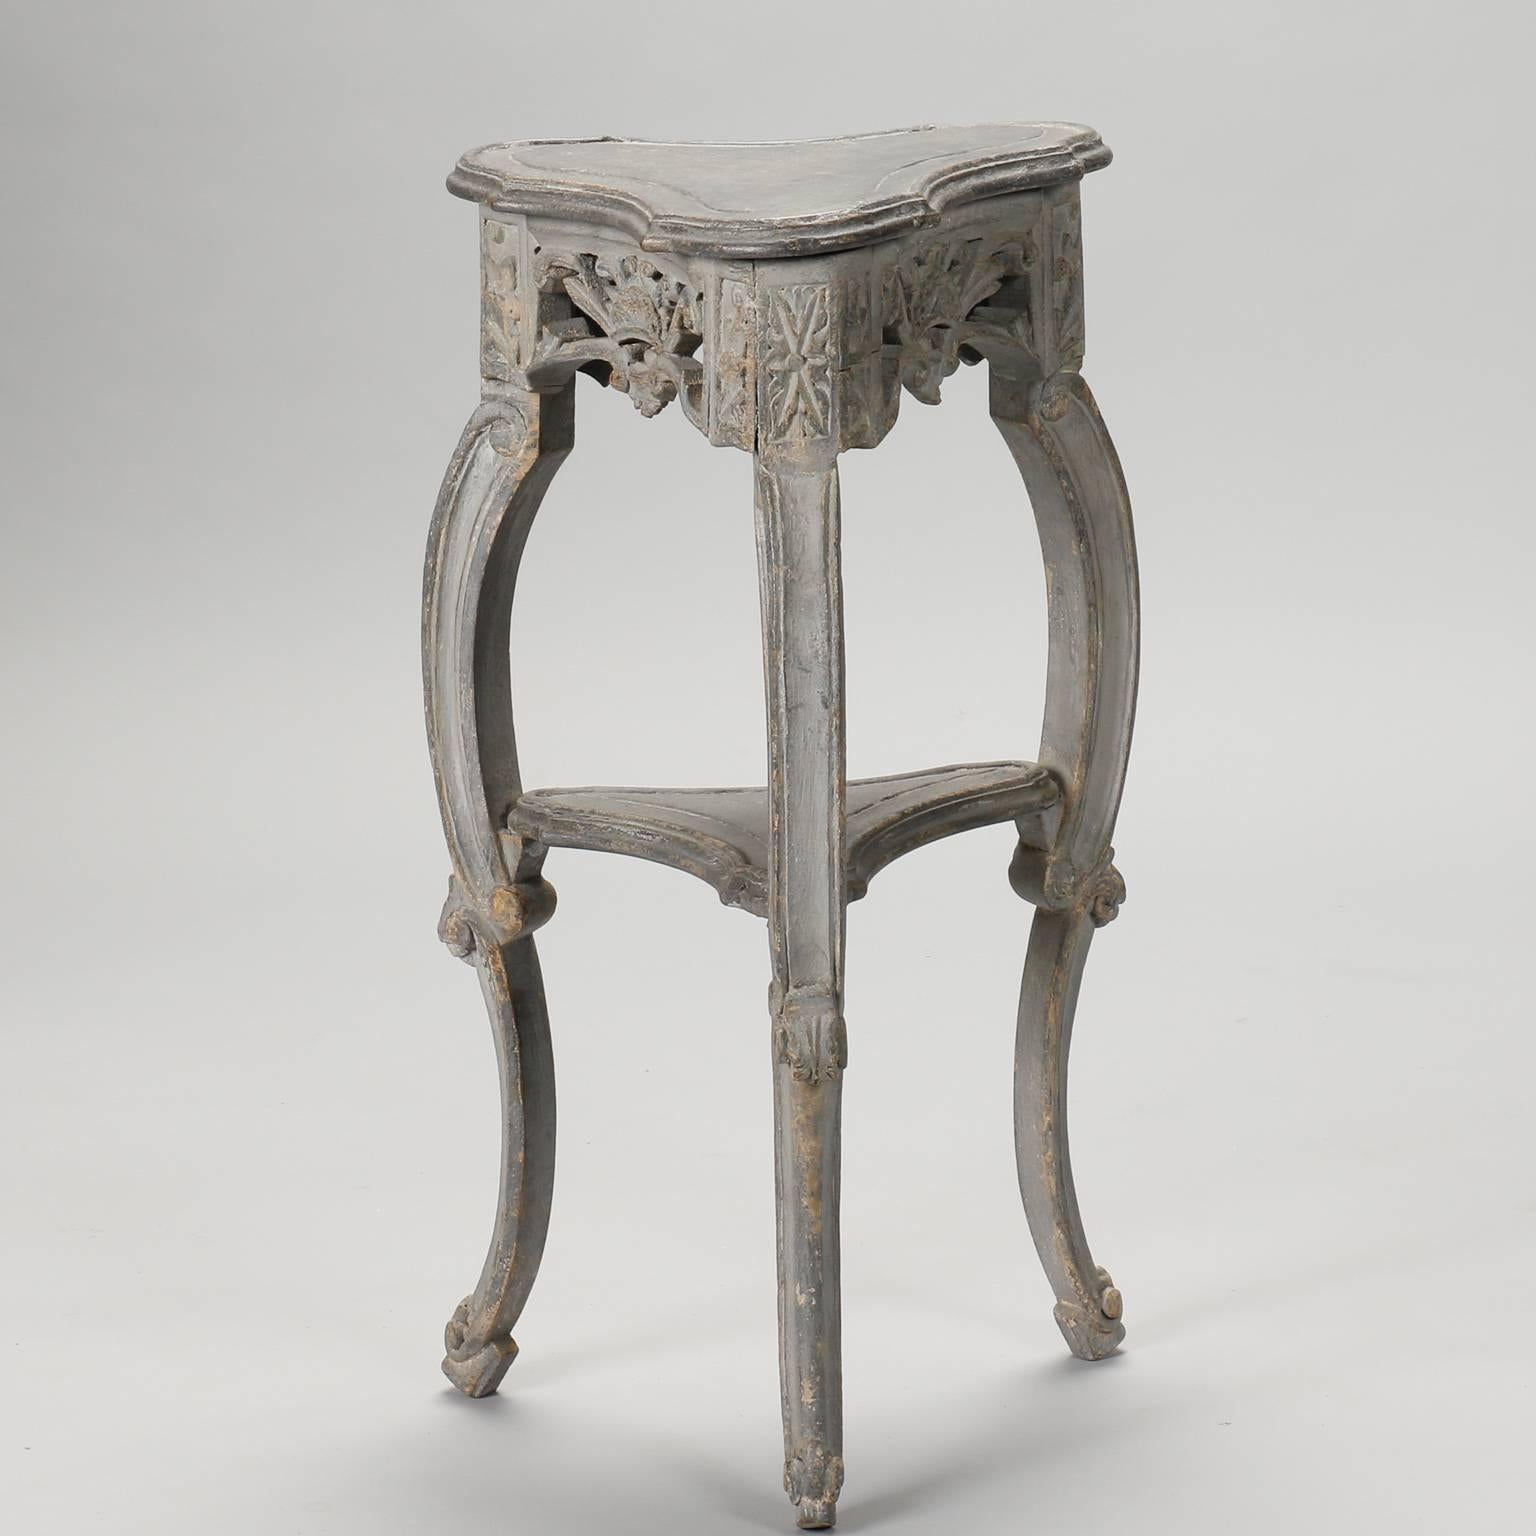 Small French side table with trefoil form top, carved details on the apron and curved legs with blue grey painted finish, circa 1900.